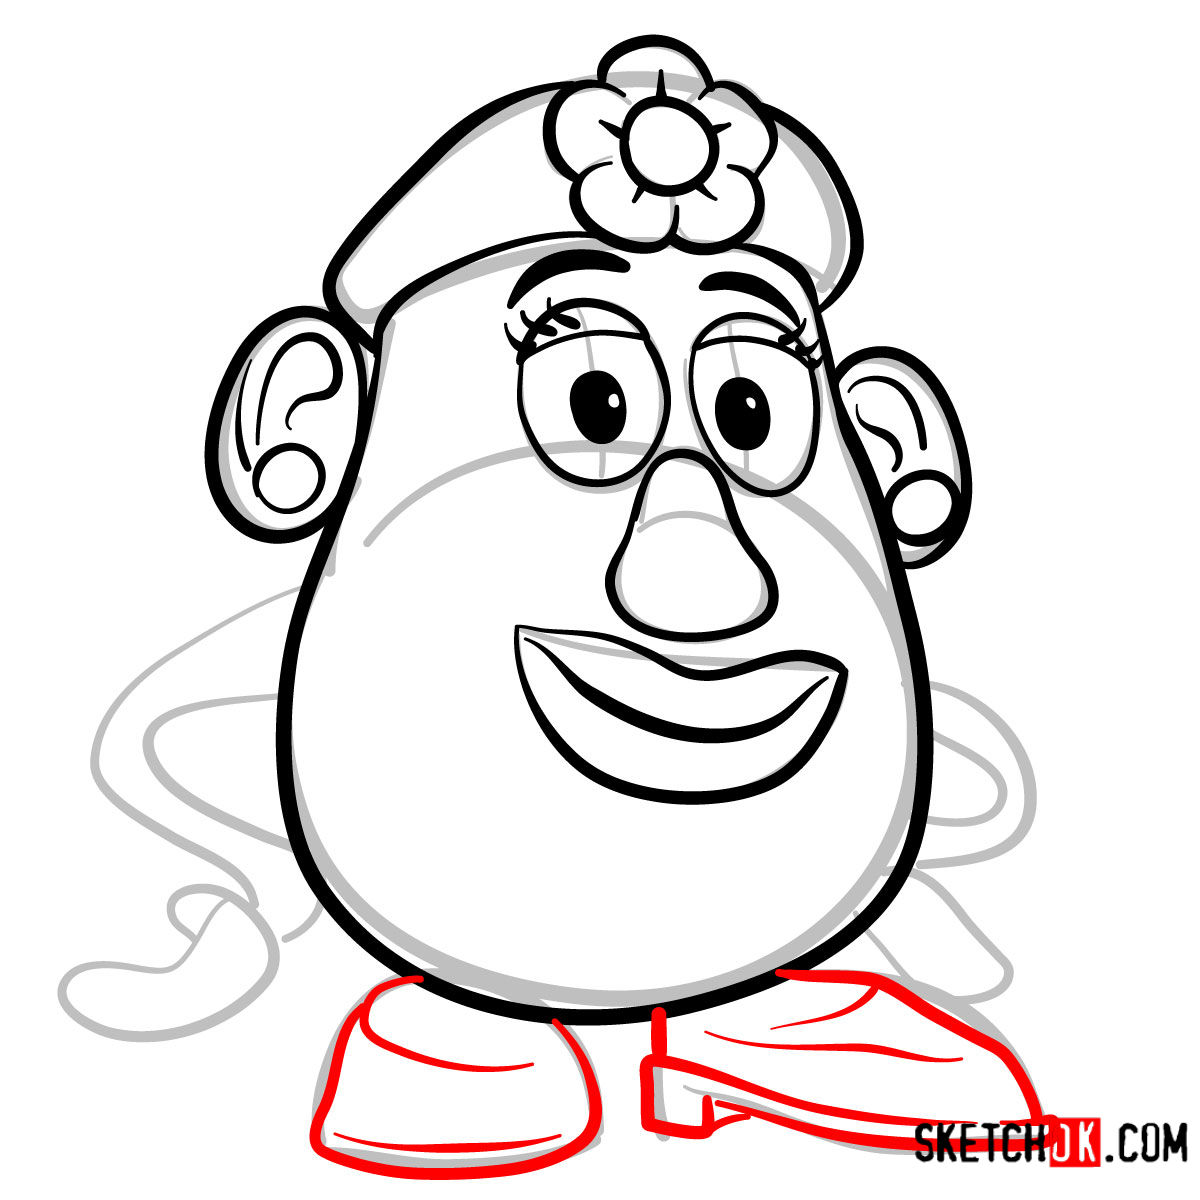 How to draw Mrs. Potato Head from Toy Story - step 07